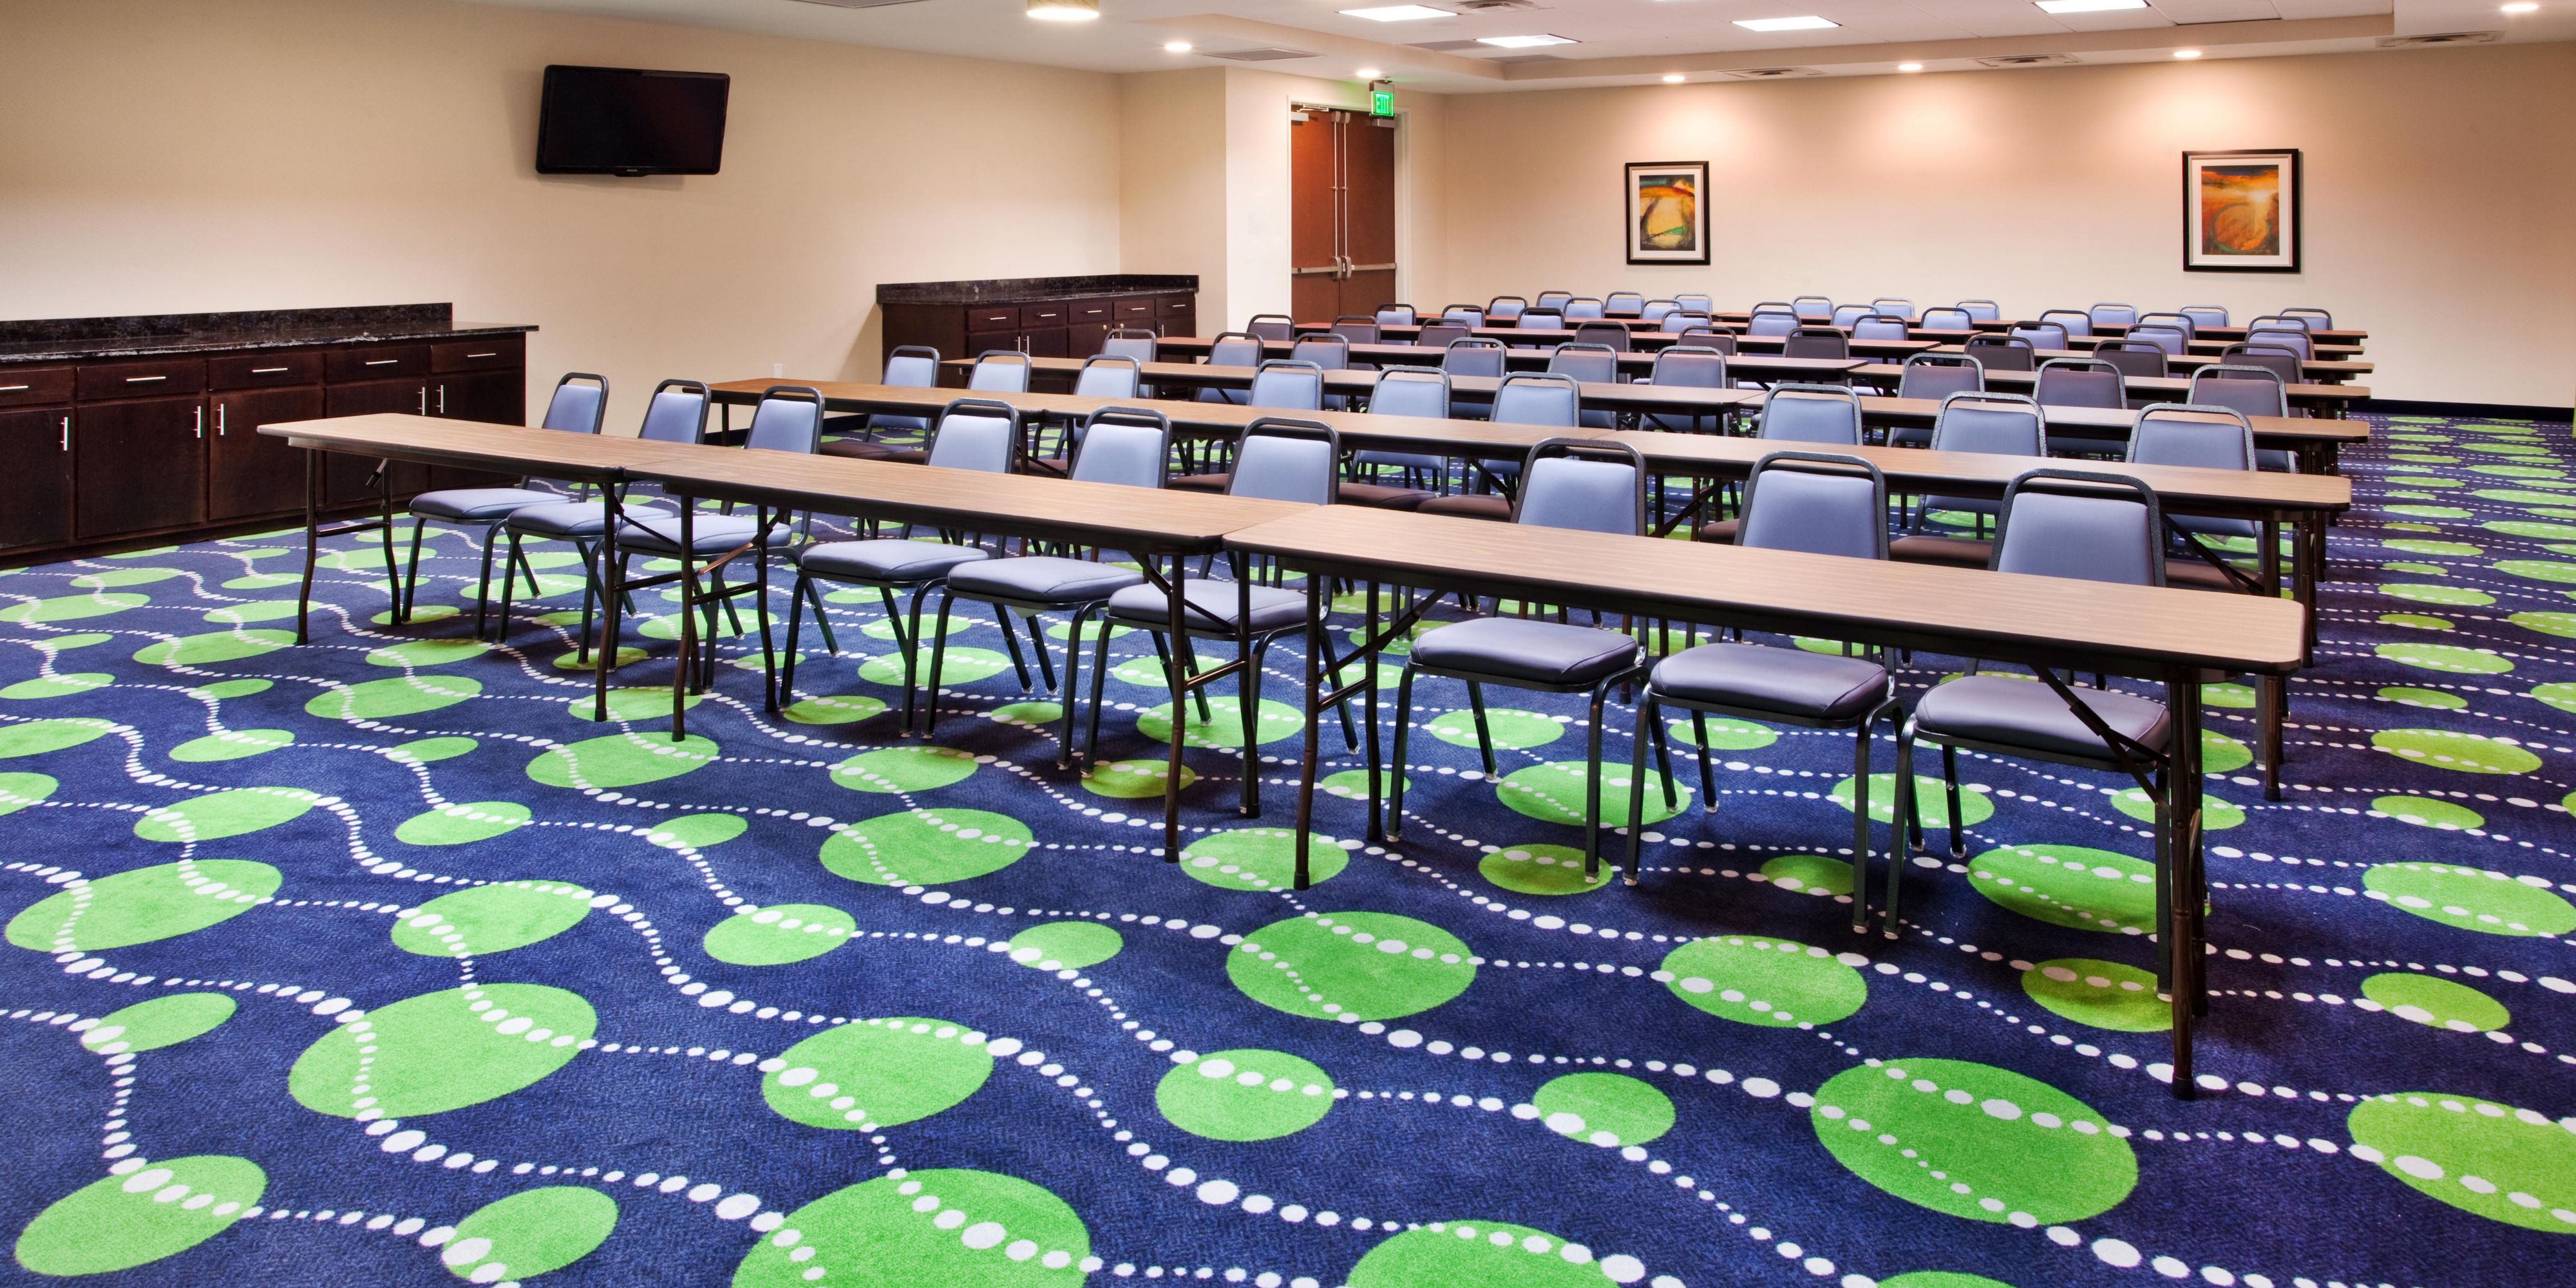 Let us host your next meeting or event! Contact our knowledgeable Sales Team today for pricing and availability.